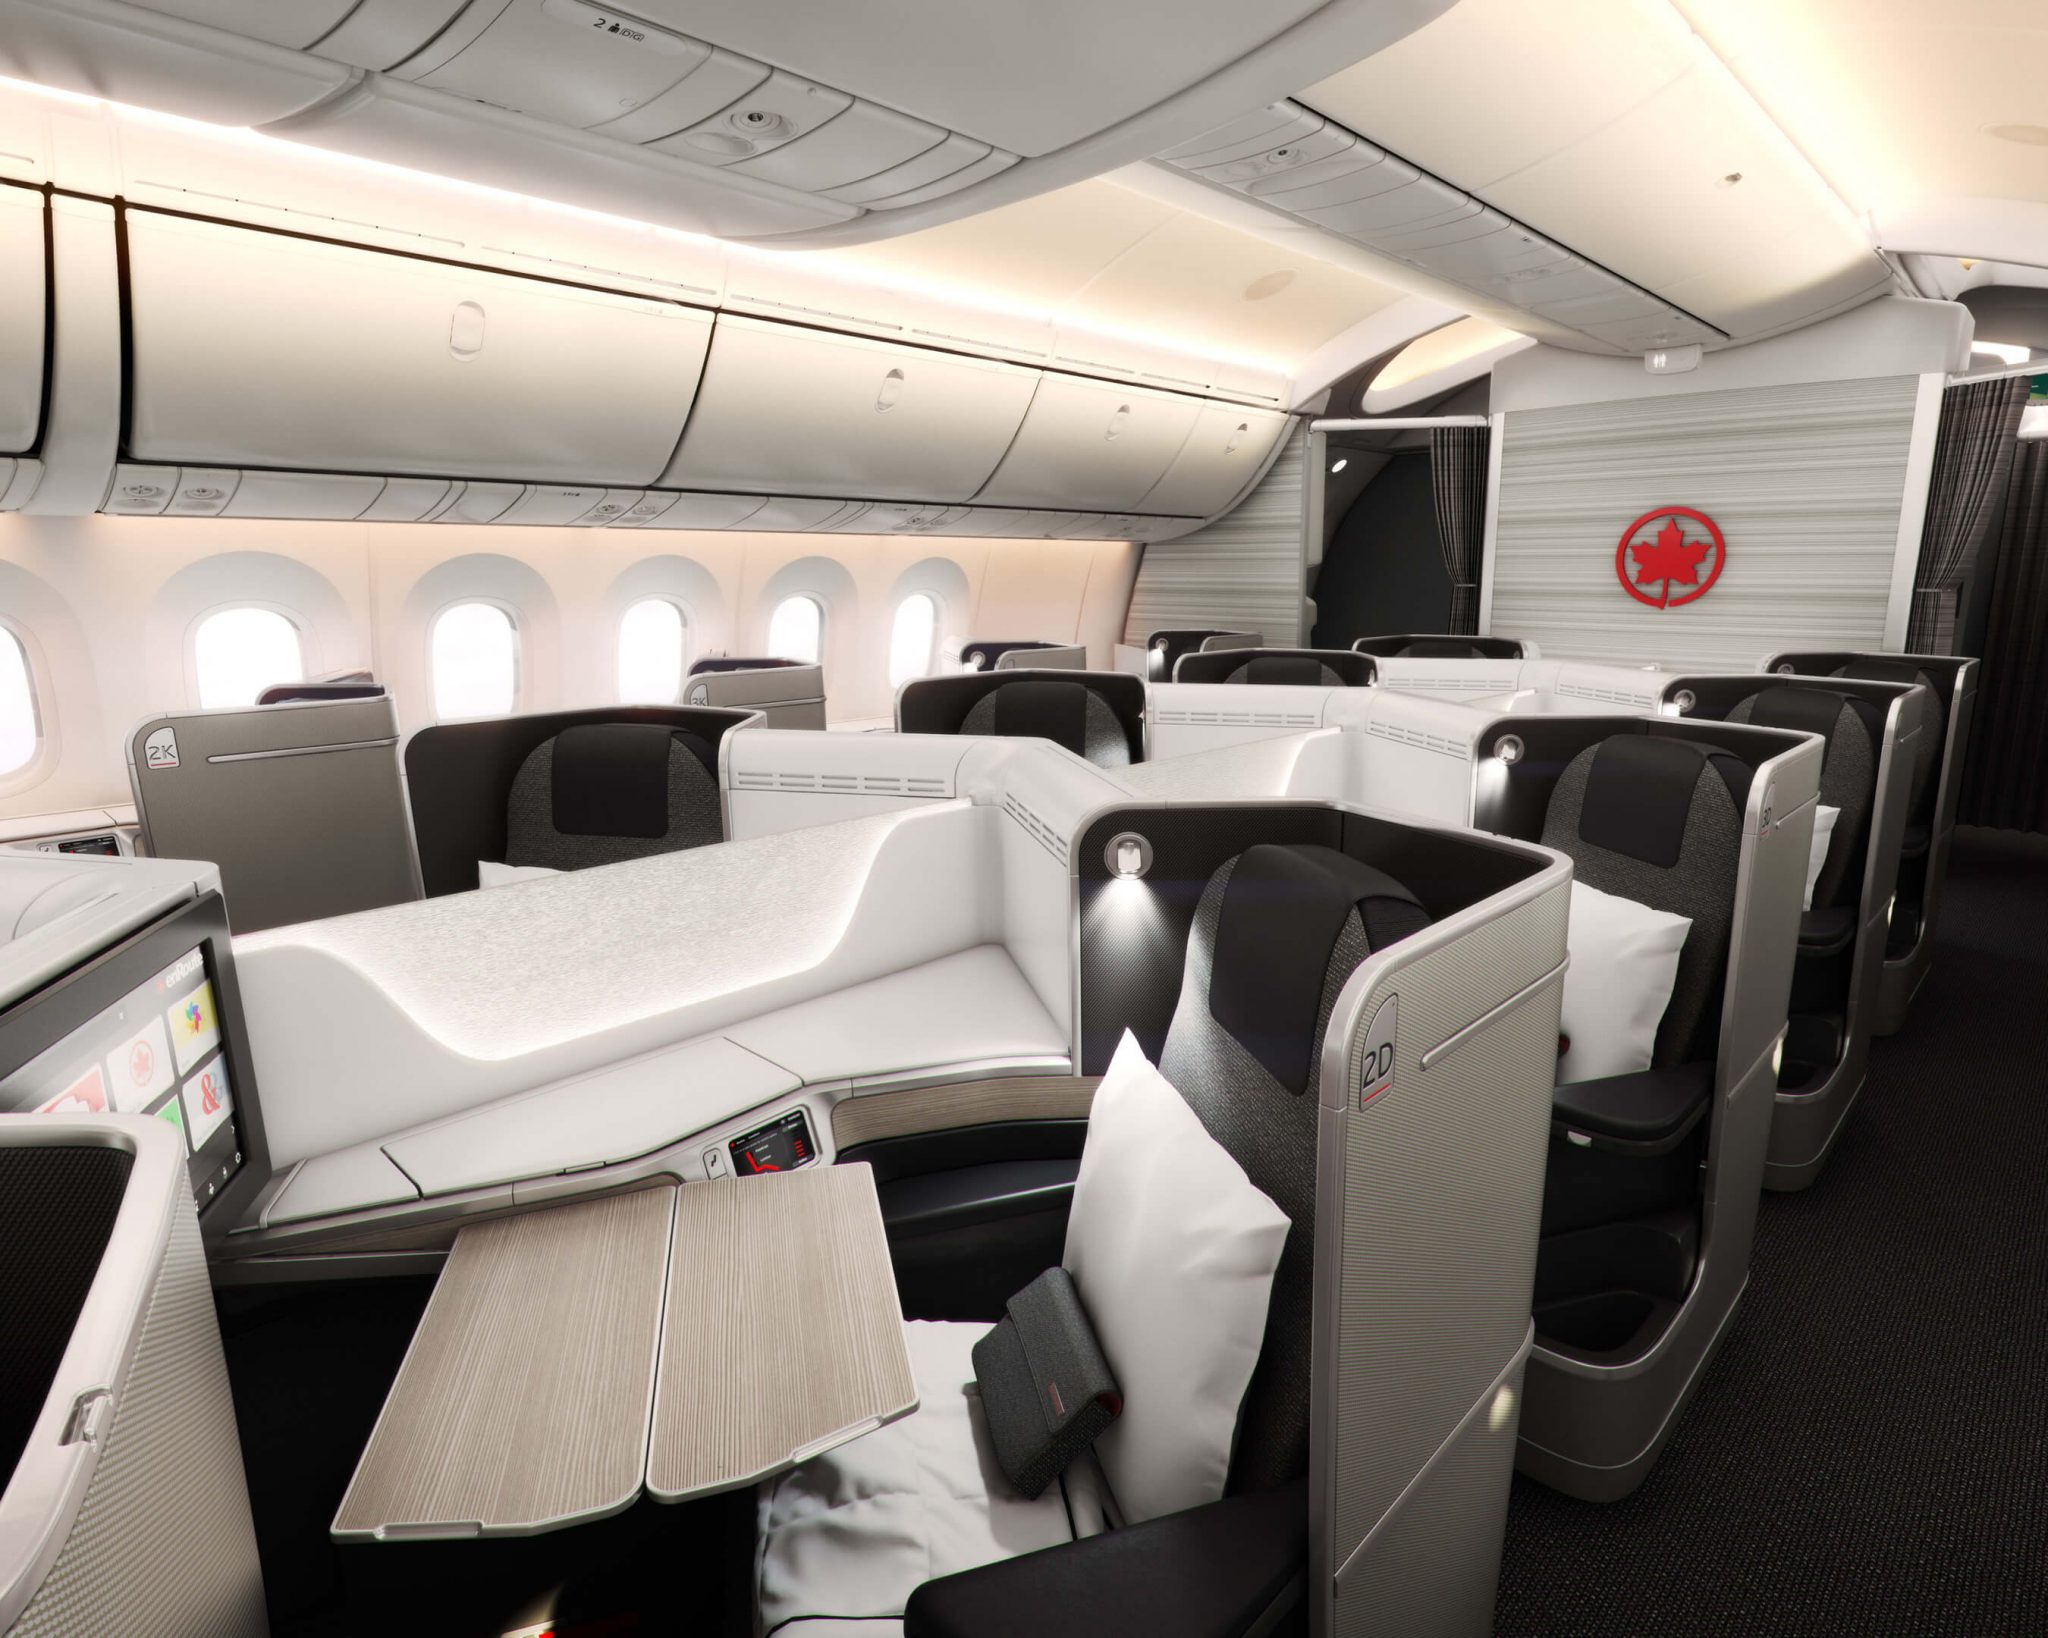 Air Canada expands its international network